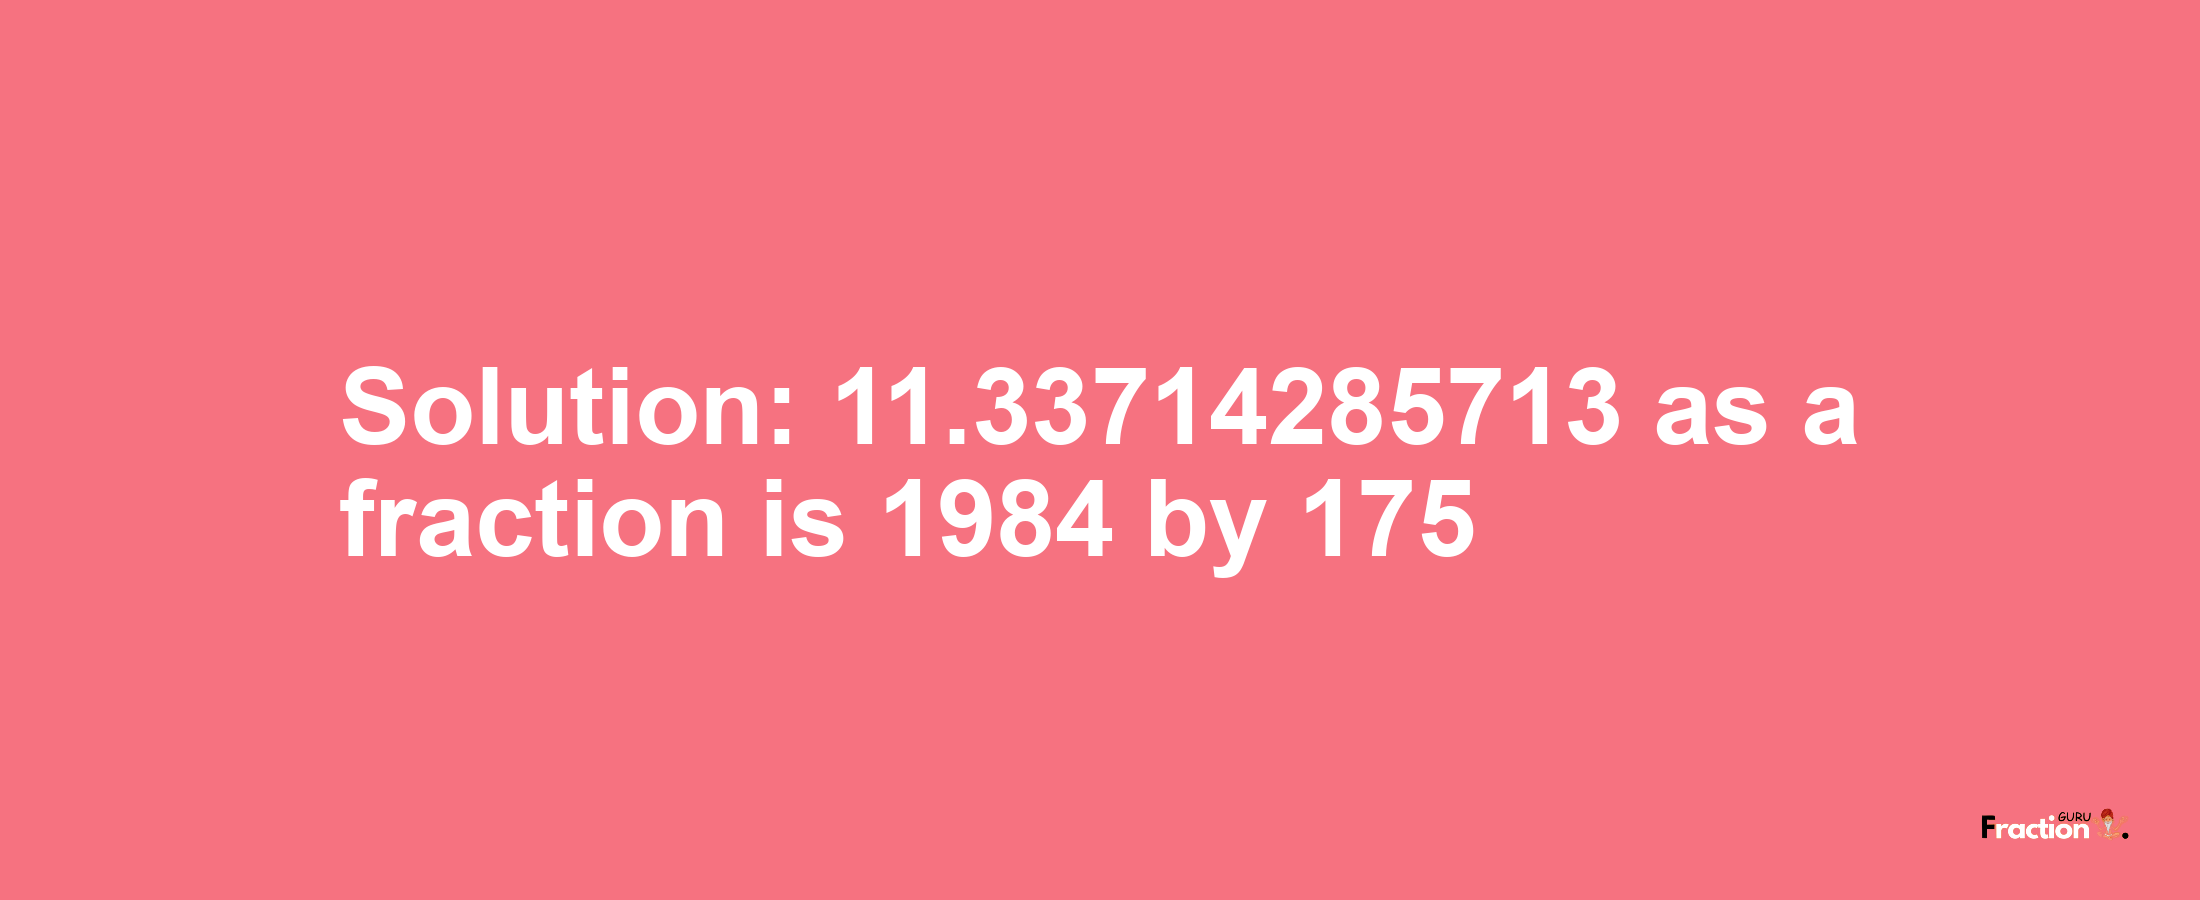 Solution:11.33714285713 as a fraction is 1984/175